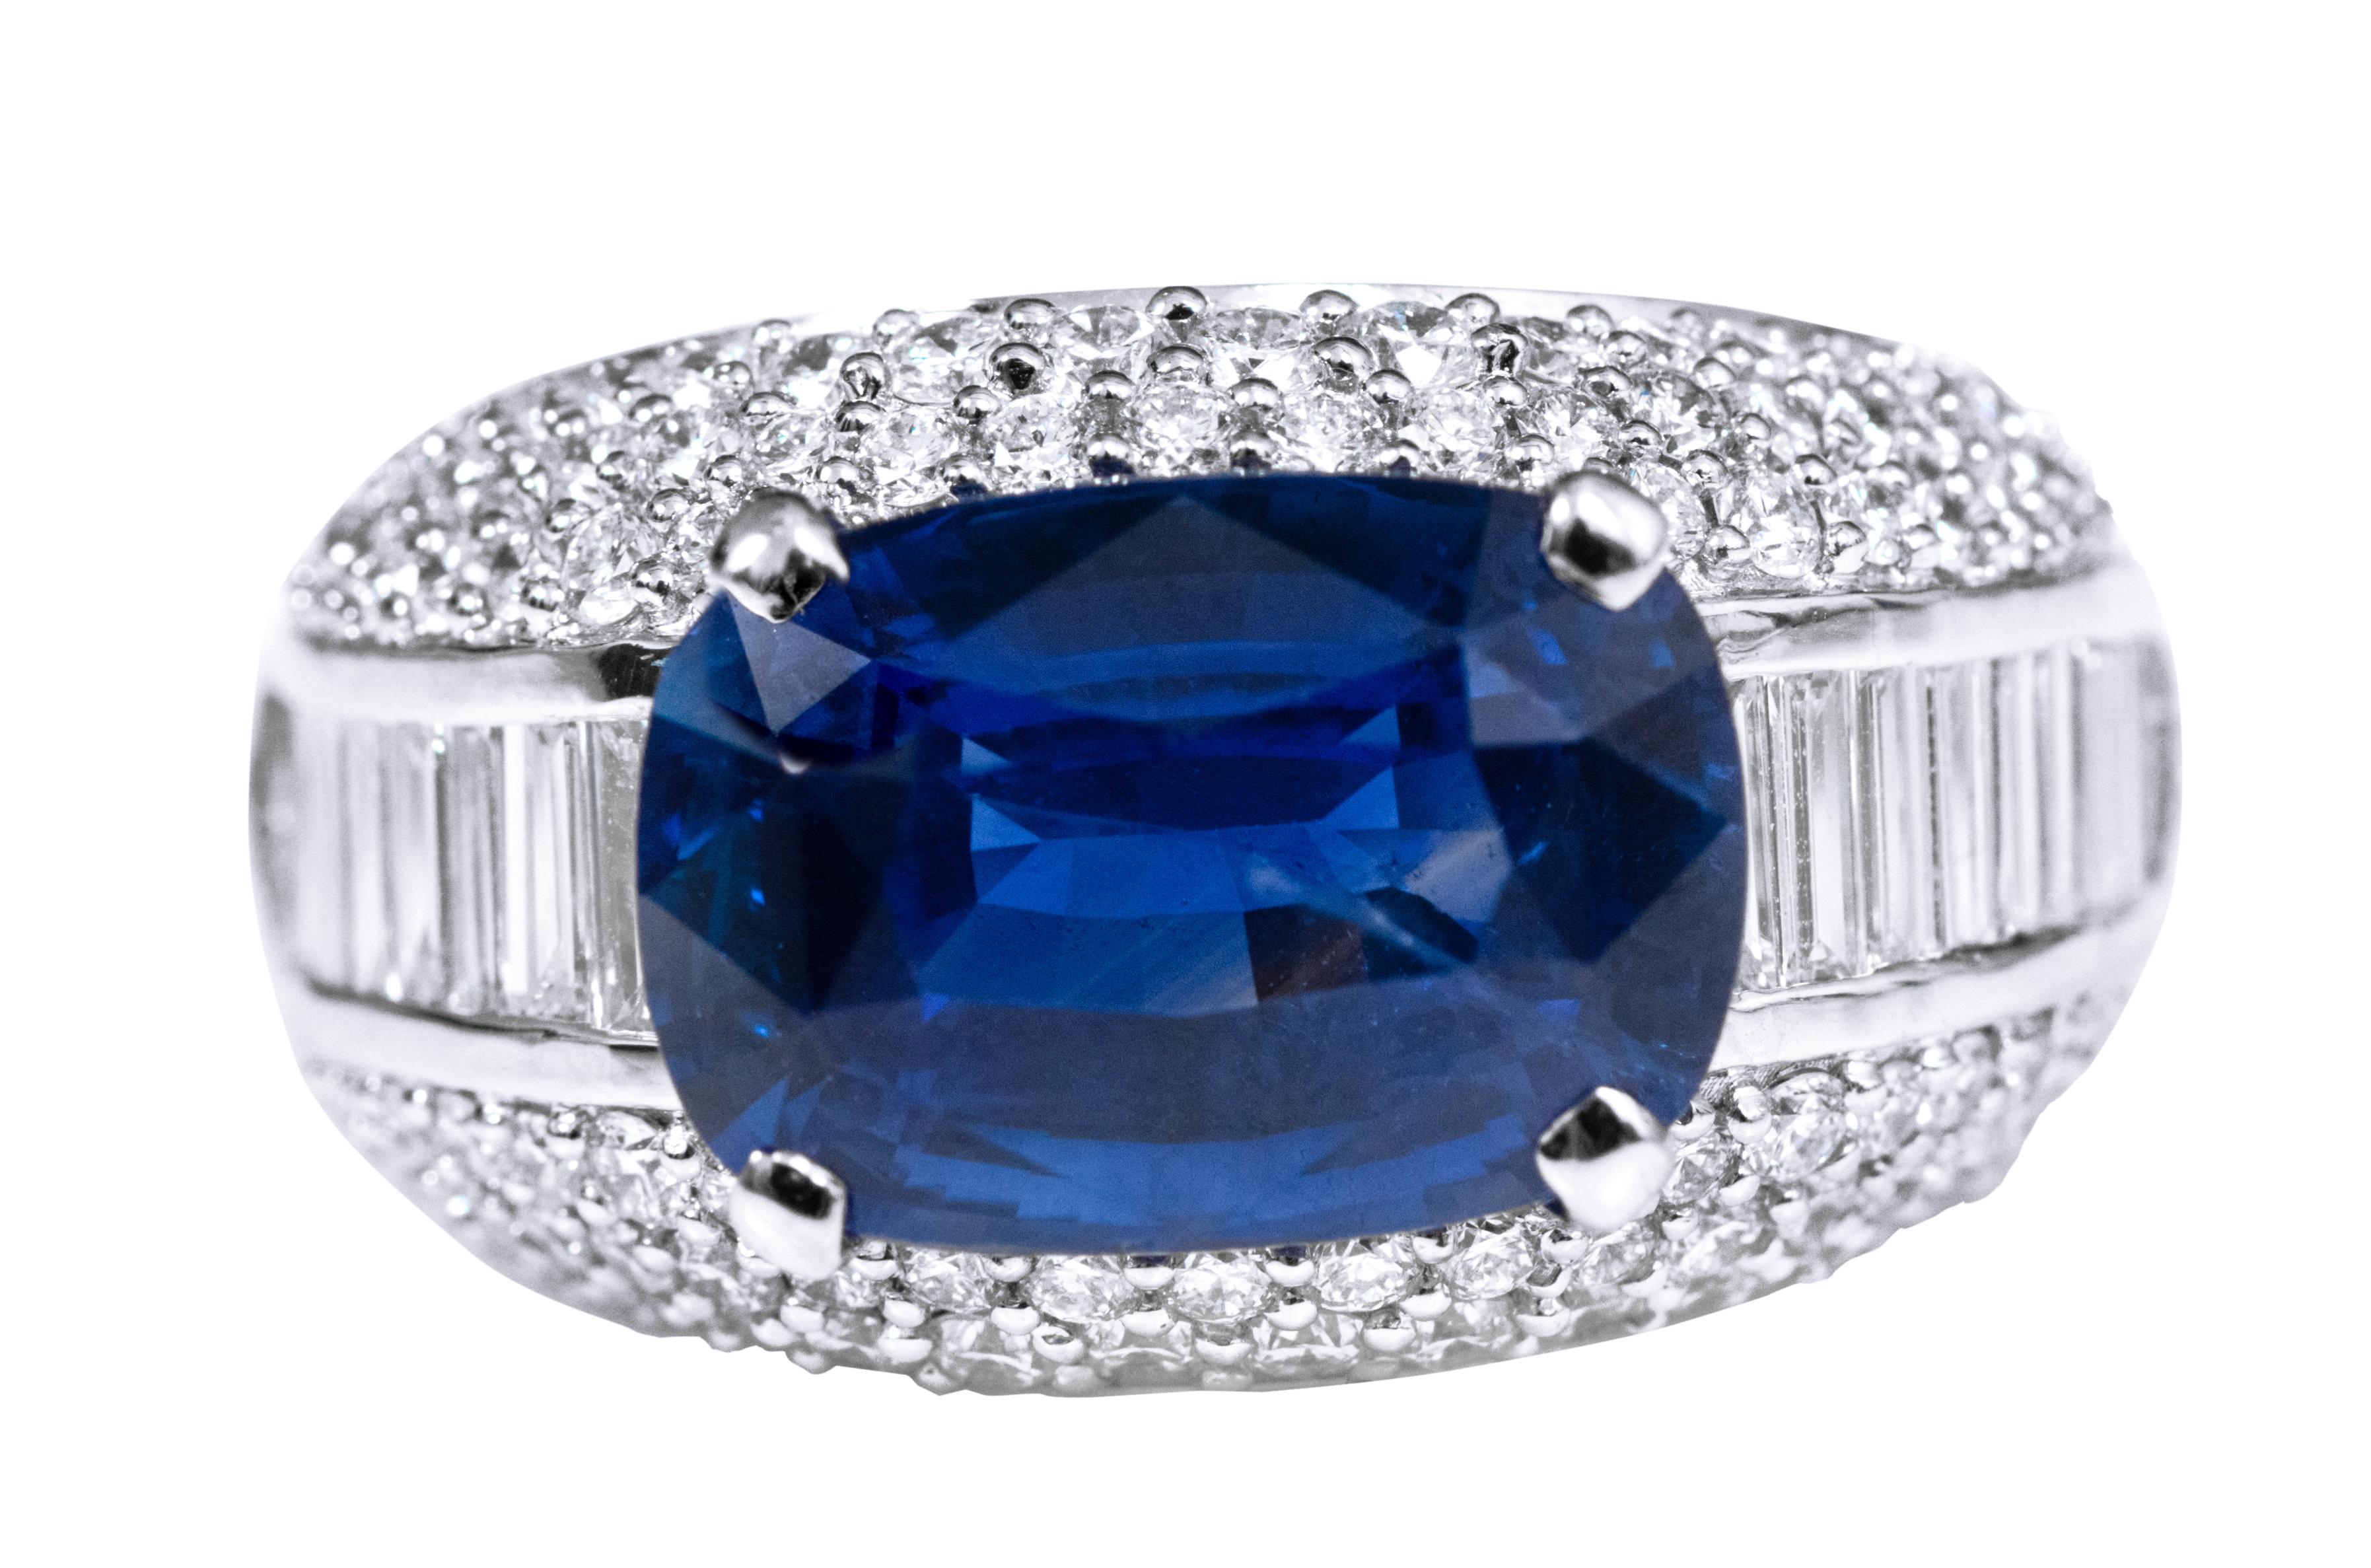 GIA Certified 8.16 Carat Royal Blue Sapphire and Diamond Solitaire Ring

This ring is a sparkling treat to the eyes and the heart. Each adornment of this classic ring is bestowed with a superior finish and organic silhouette. Its design is timeless,